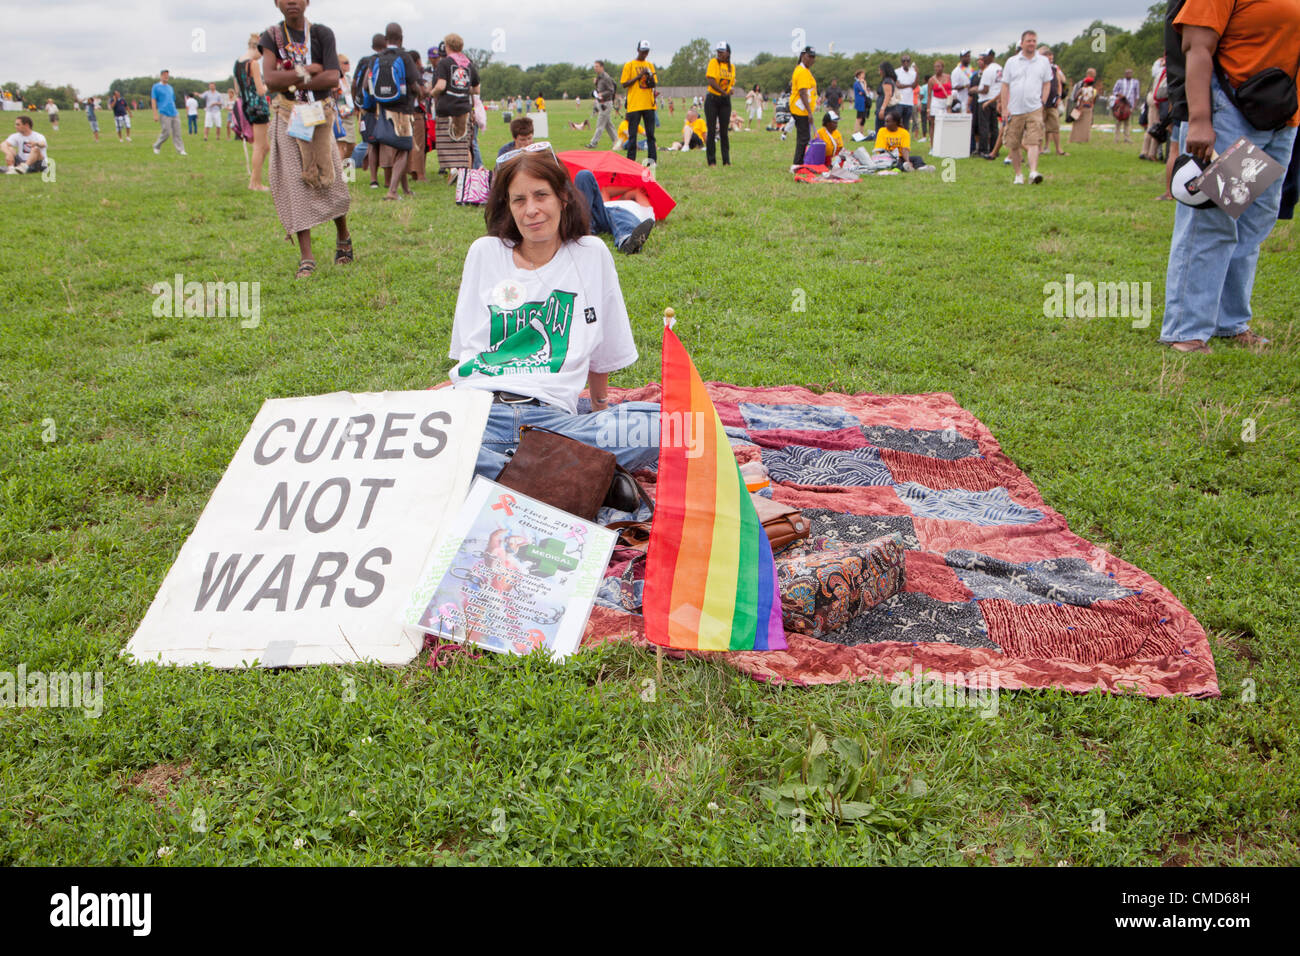 A woman rests while displaying a sign and a rainbow flag, as she waits for the AIDS march in Washington, DC to start - July 22, 2012, Washington, DC USA Stock Photo